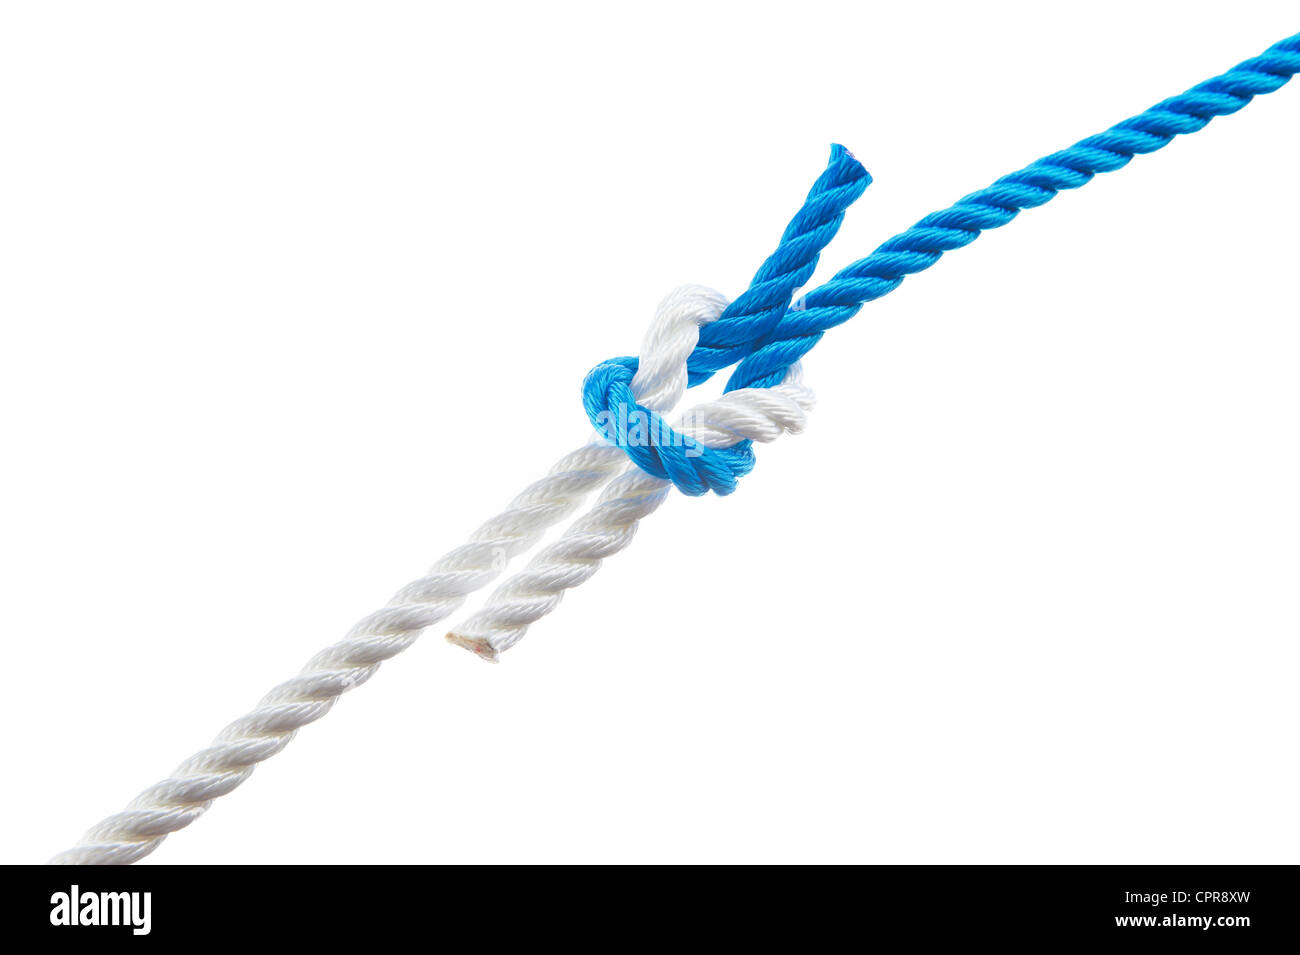 Thief knot isolated on white background Stock Photo